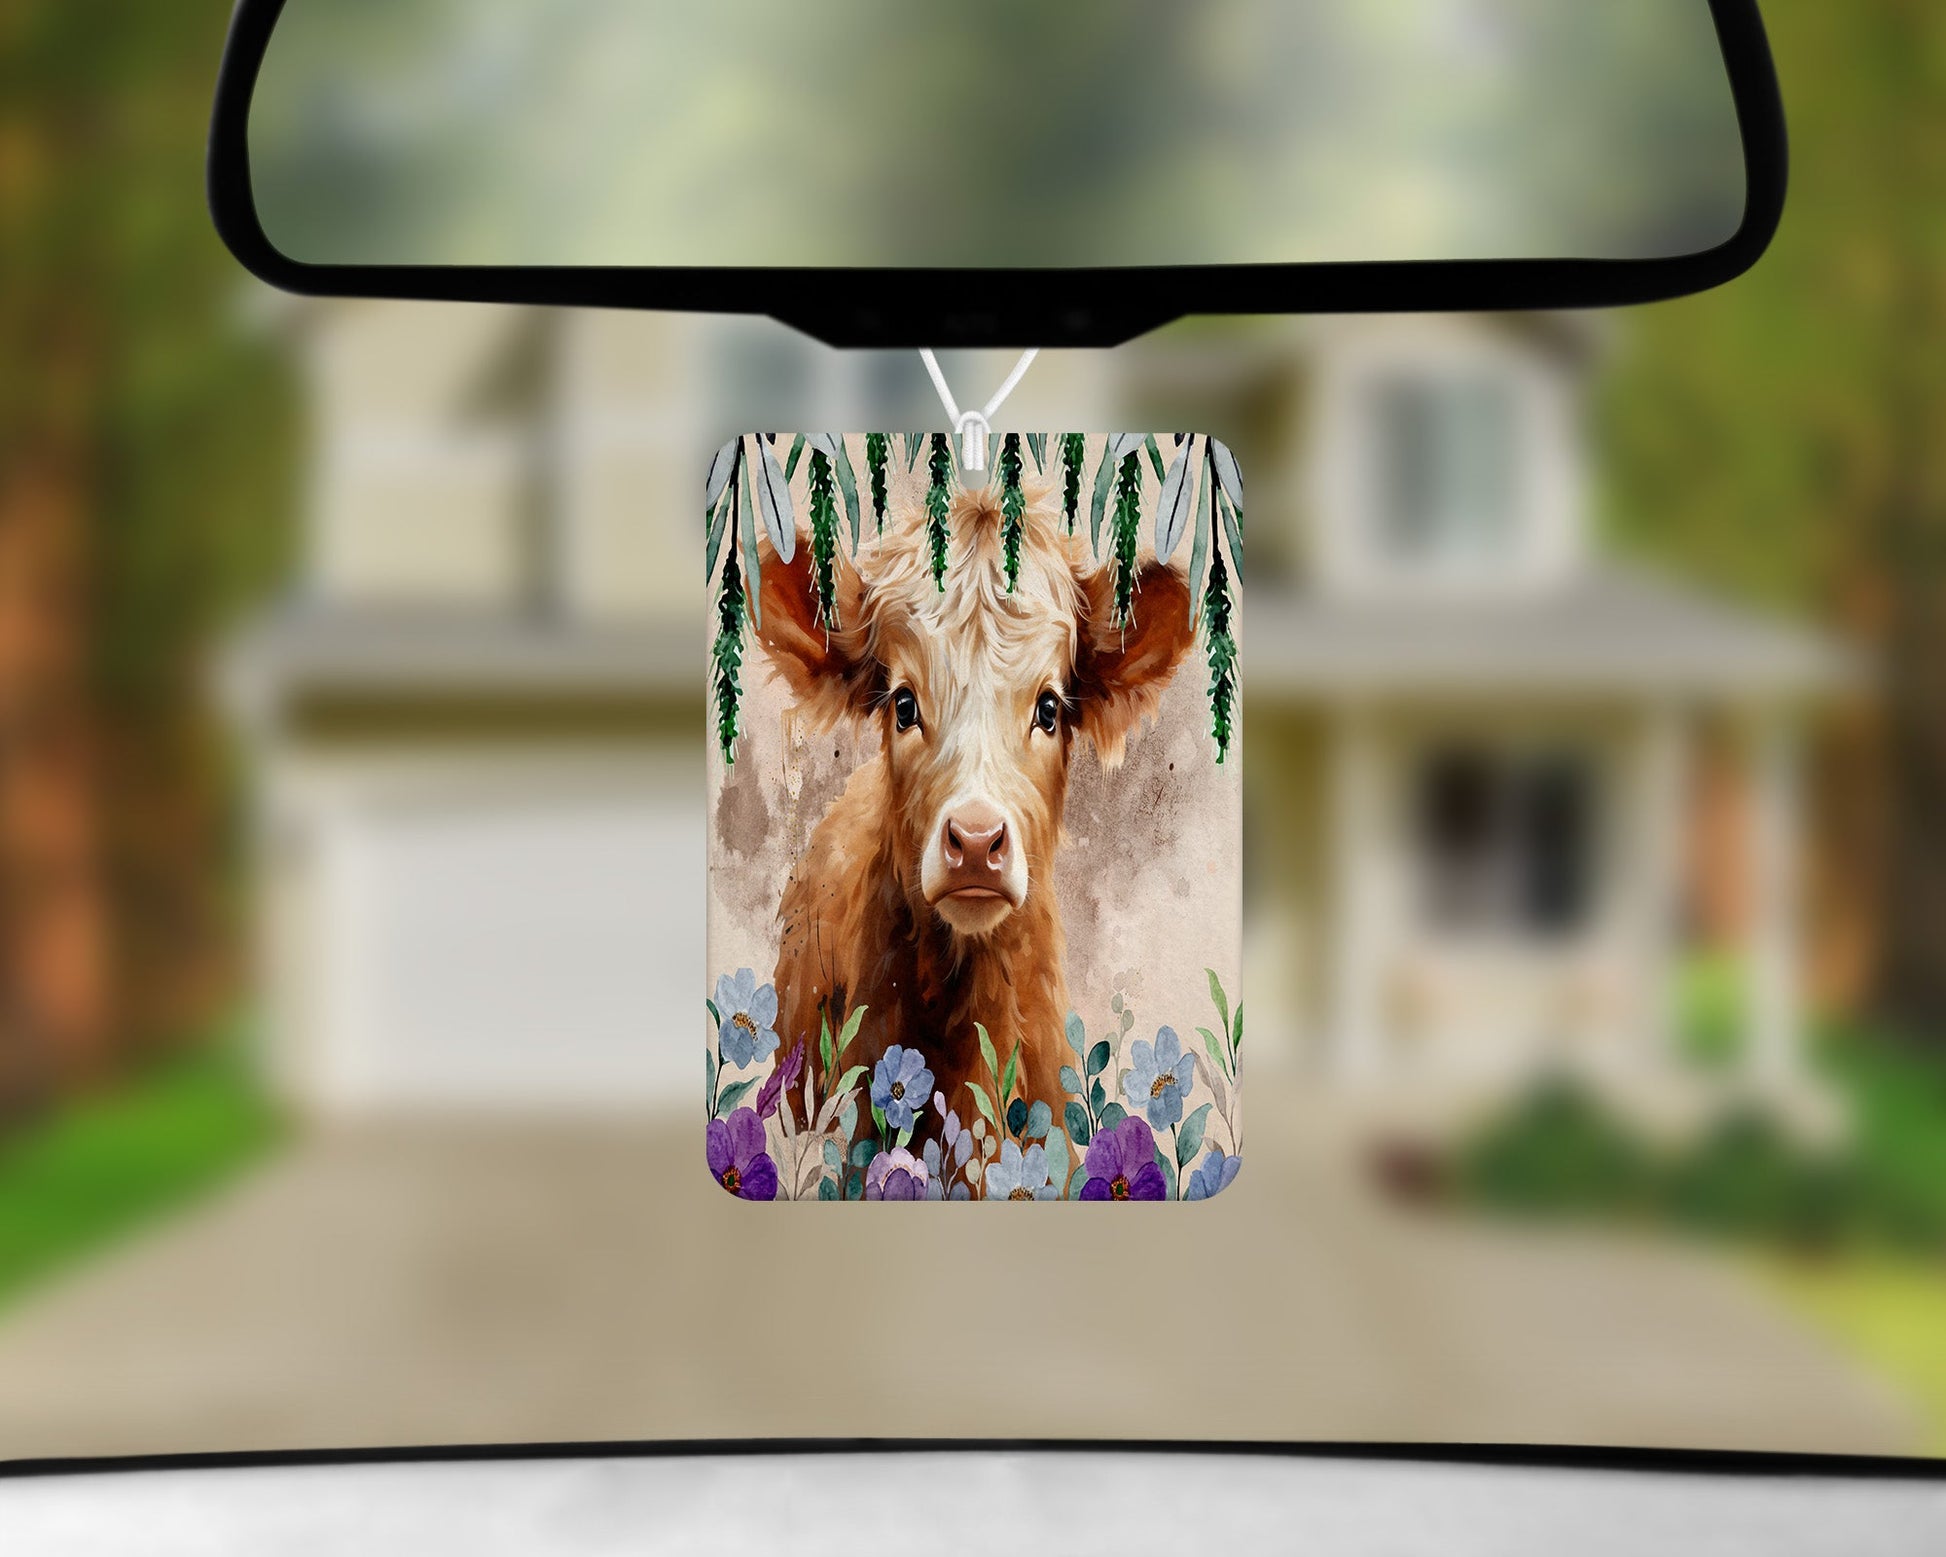 Calf|Freshie|Includes Scent Bottle - Vehicle Air Freshener